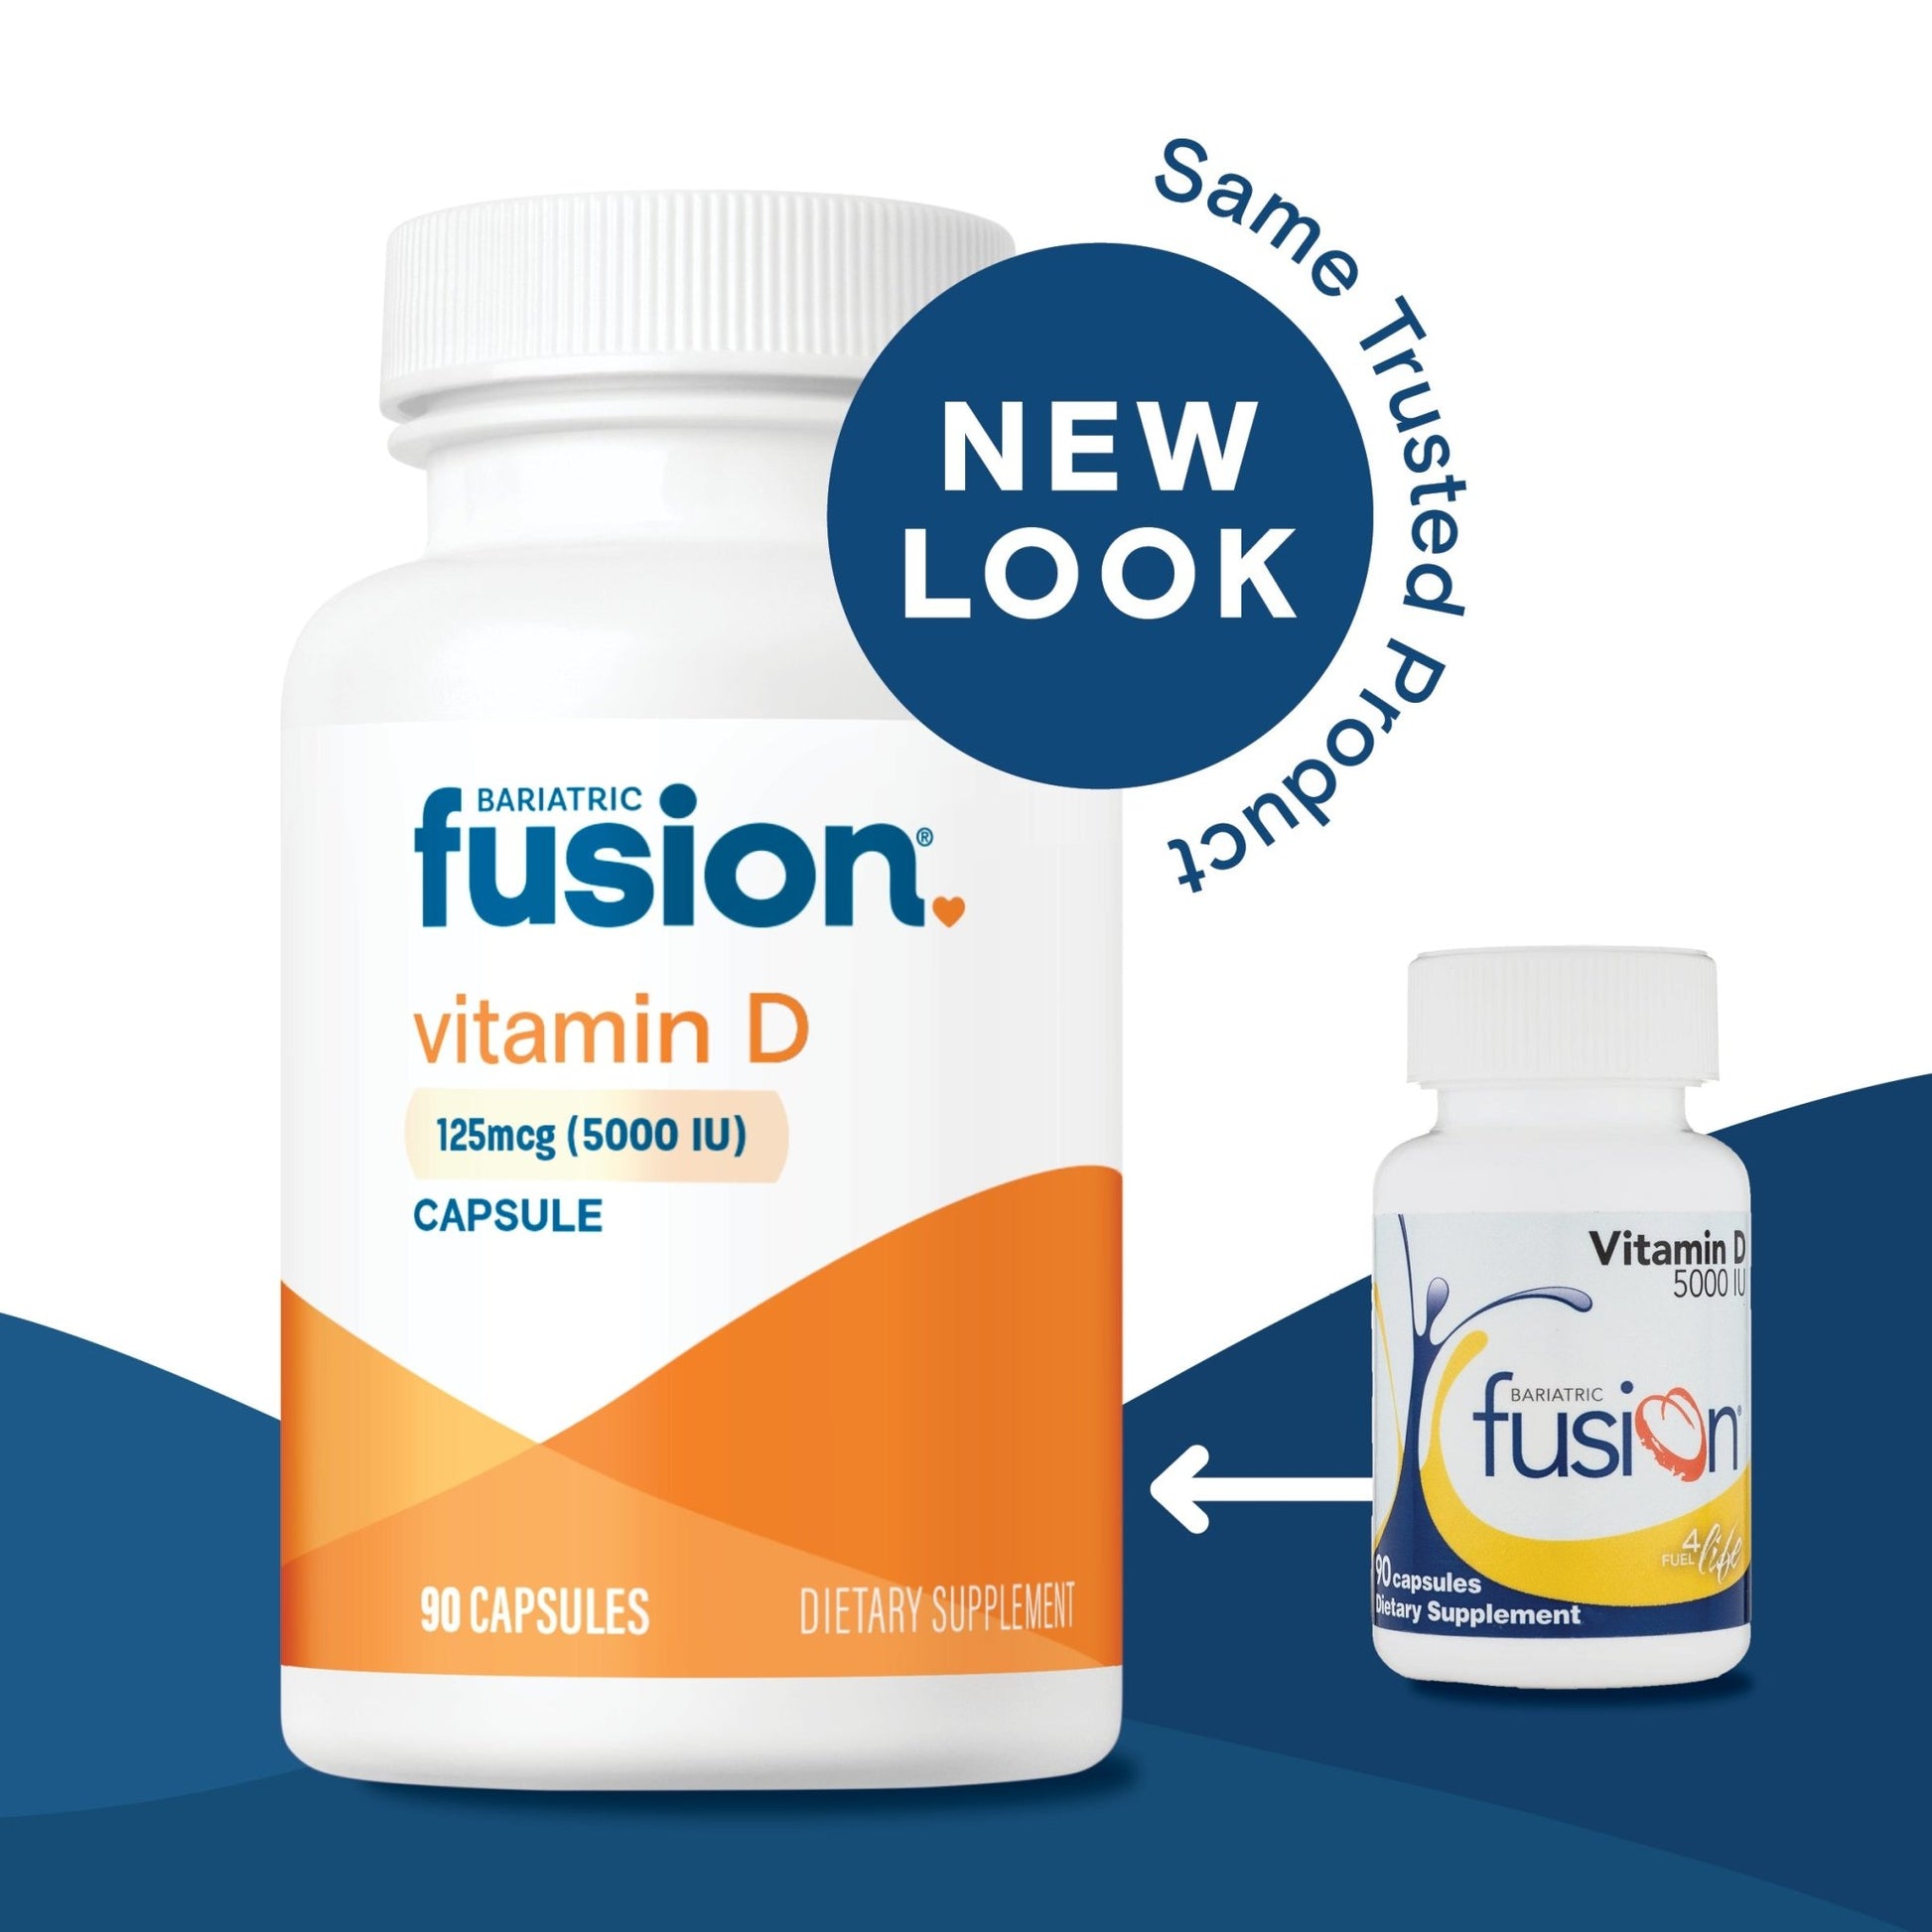 Bariatric Fusion Vitamin D capsules new look, same trusted product.